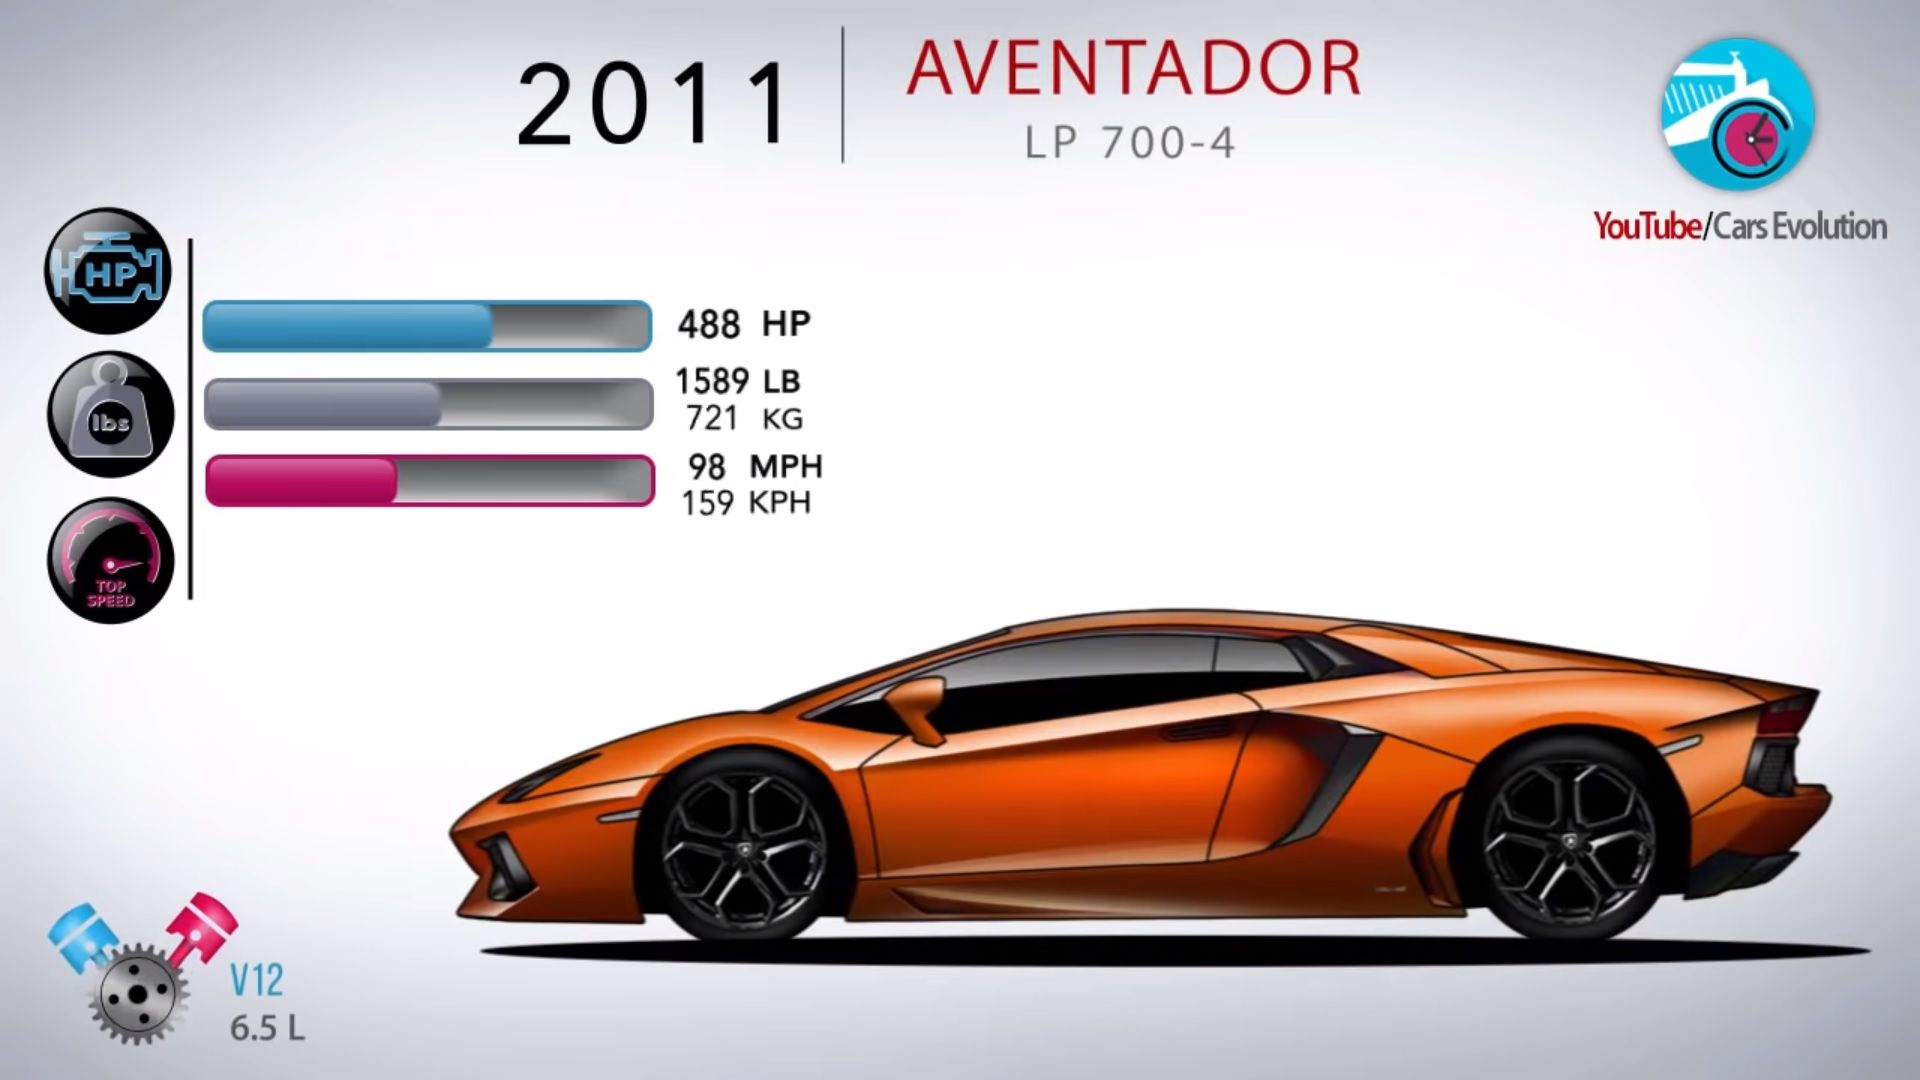 godt puls Kejser Video: How the Lamborghini Aventador Has Evolved Over the Years